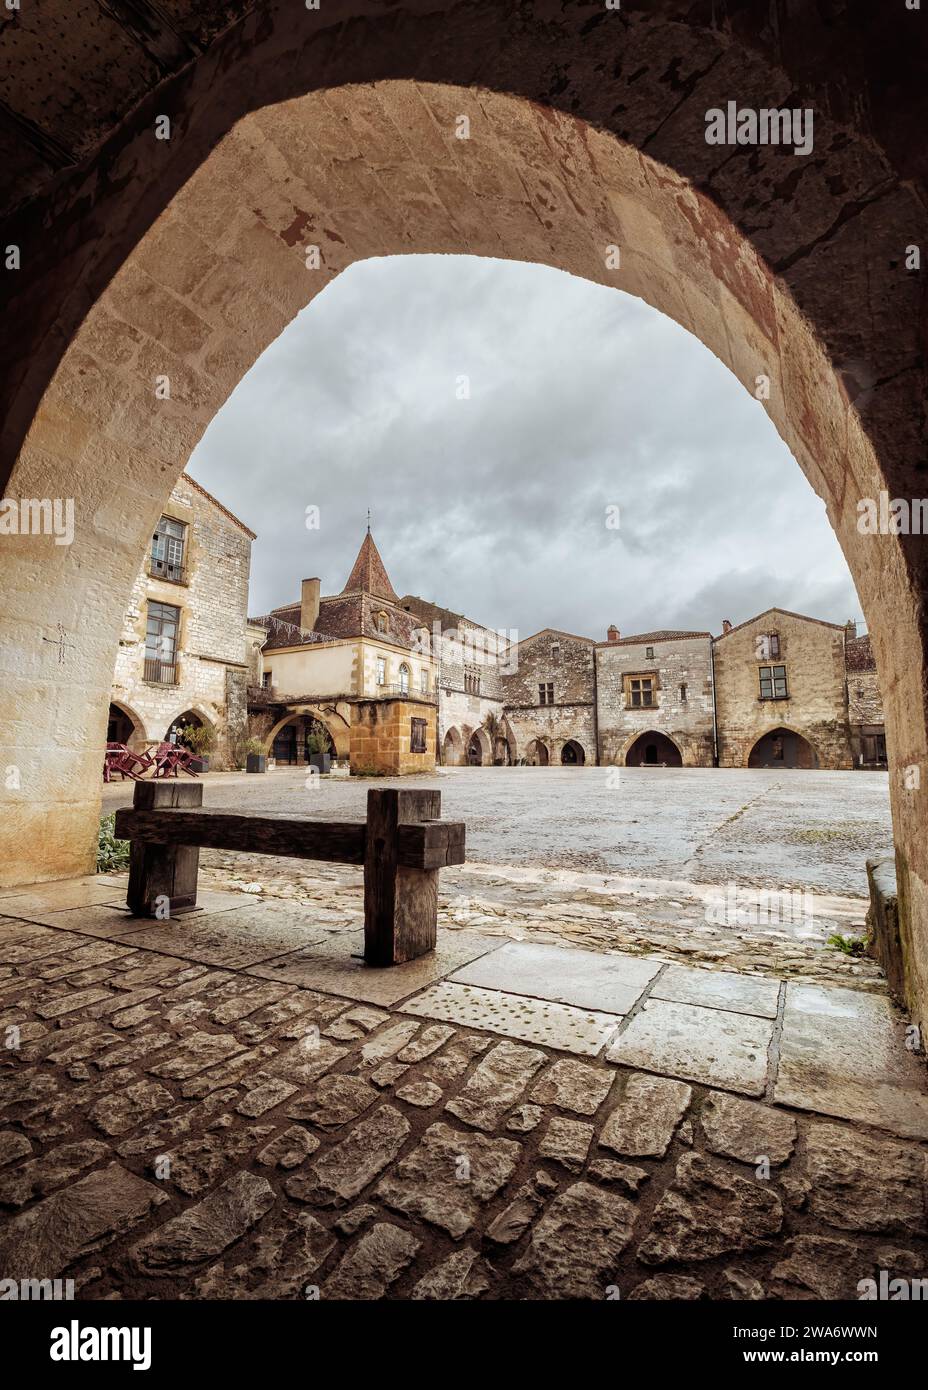 Place des Cornieres, the market square in the 13th century bastide of Monpazier in the Dordogne region of France Stock Photo